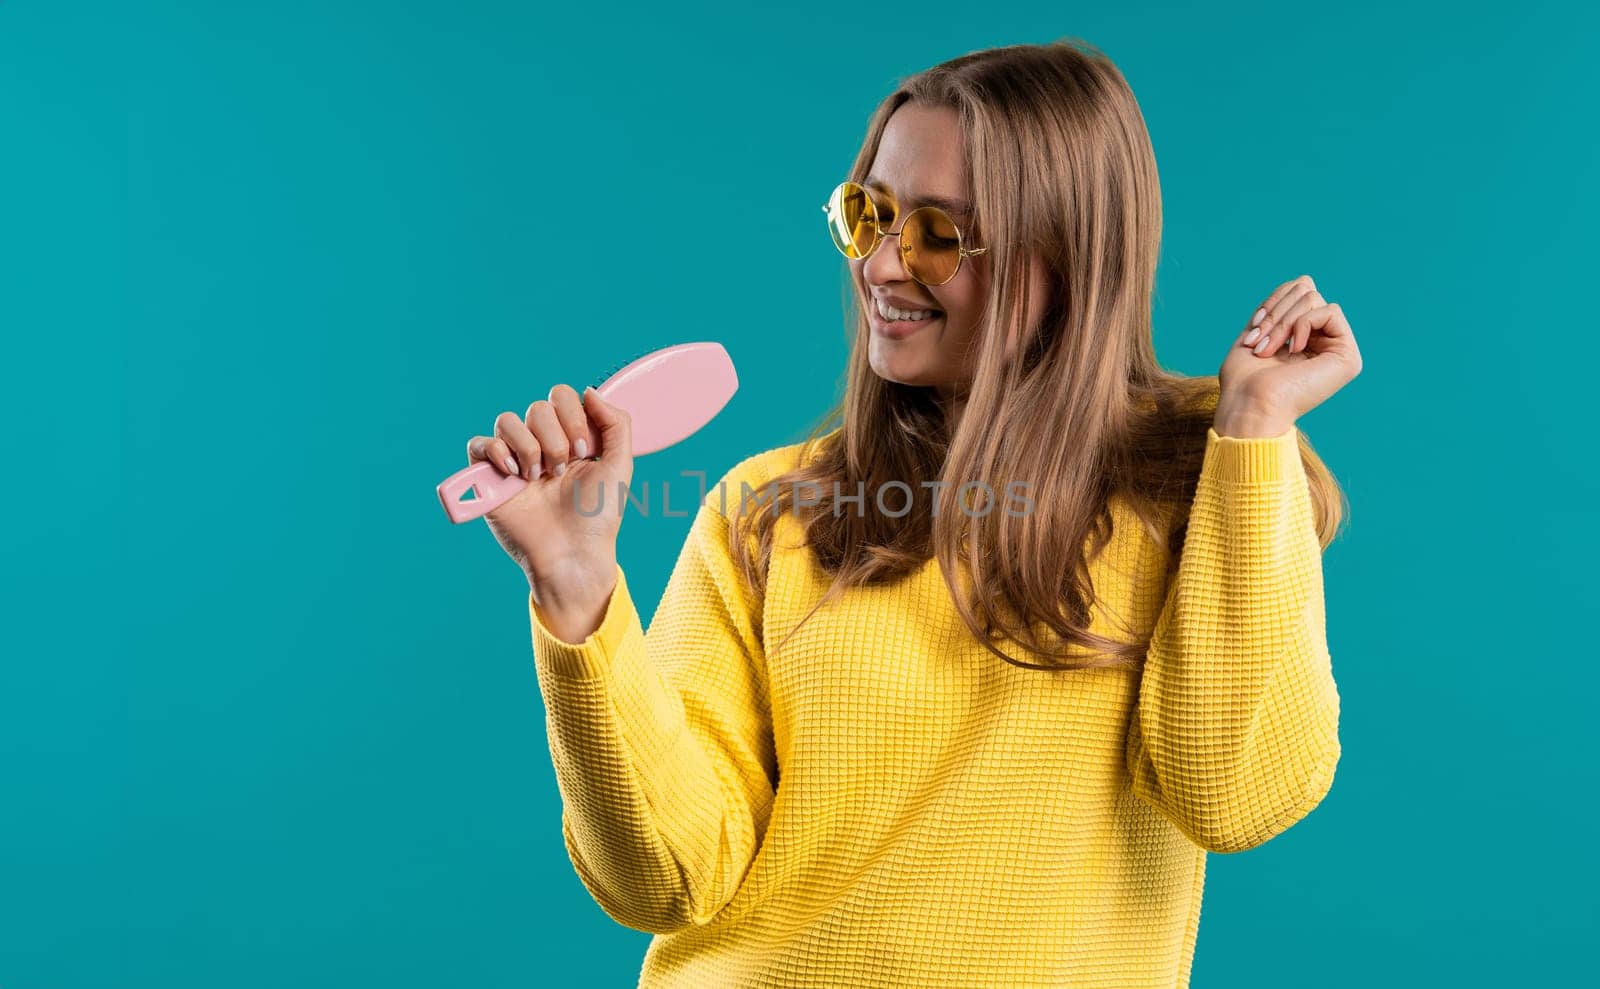 Woman singing, dancing with hair brush instead microphone on blue background by kristina_kokhanova